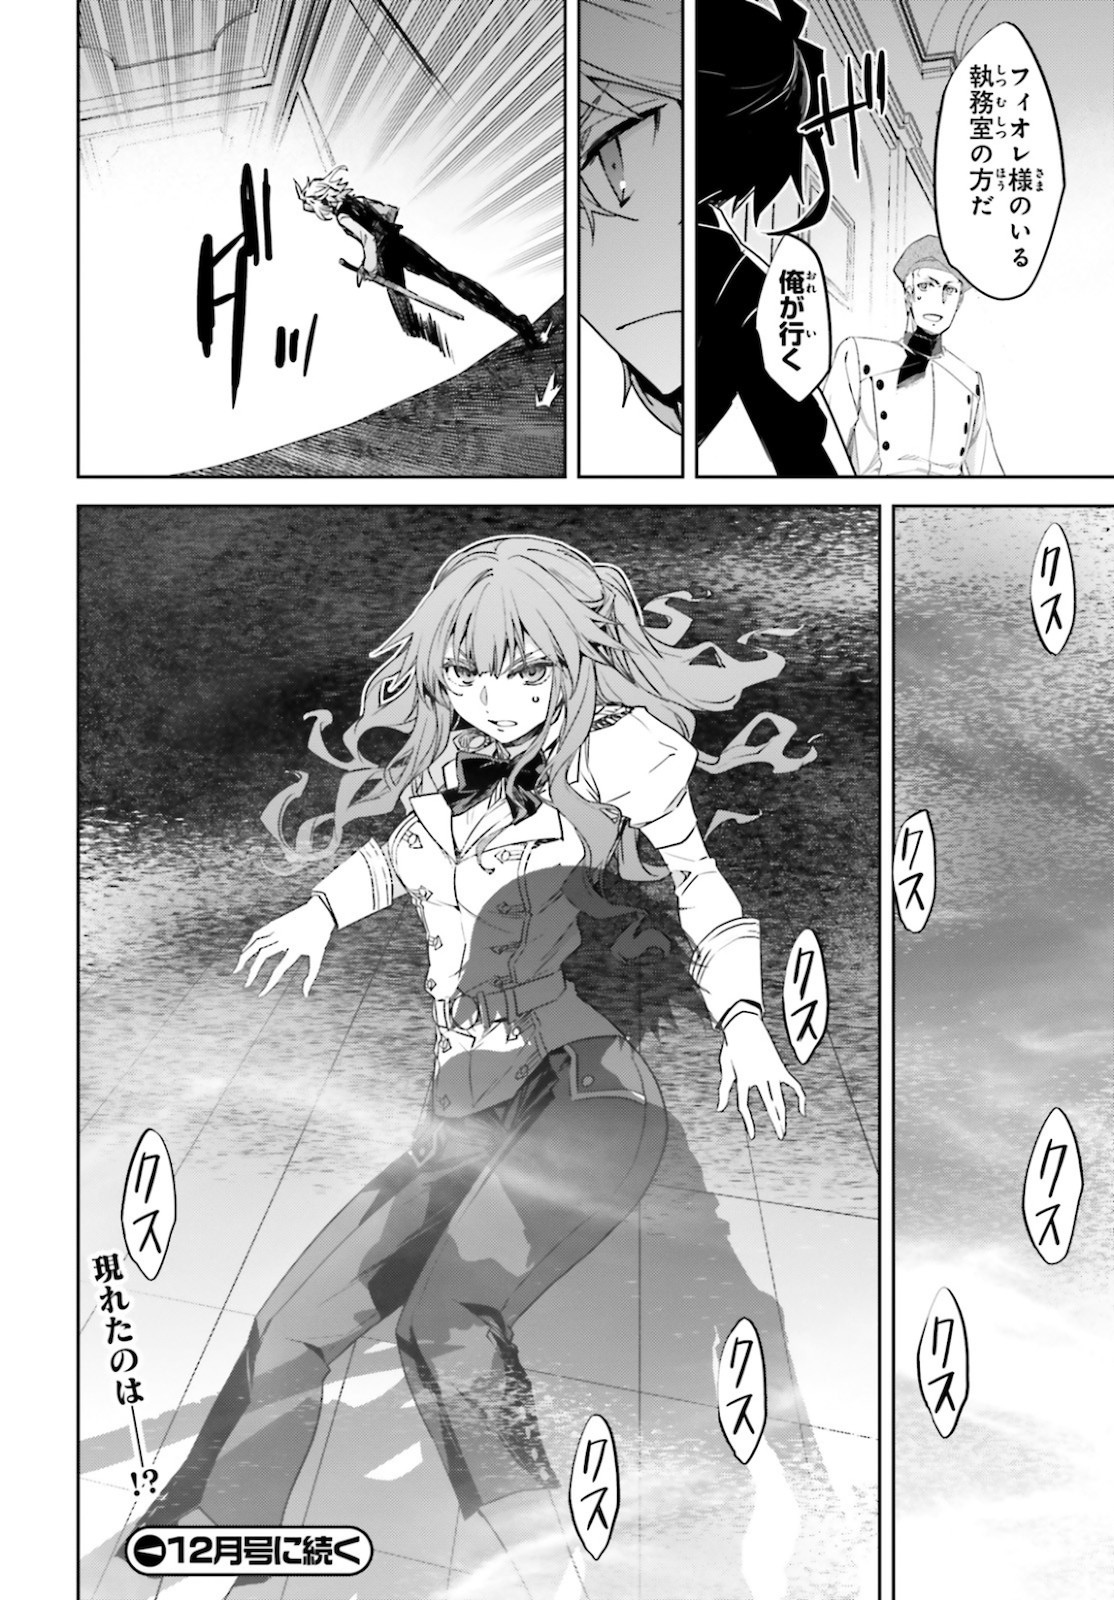 Fate-Apocrypha - Chapter 45 - Page 16